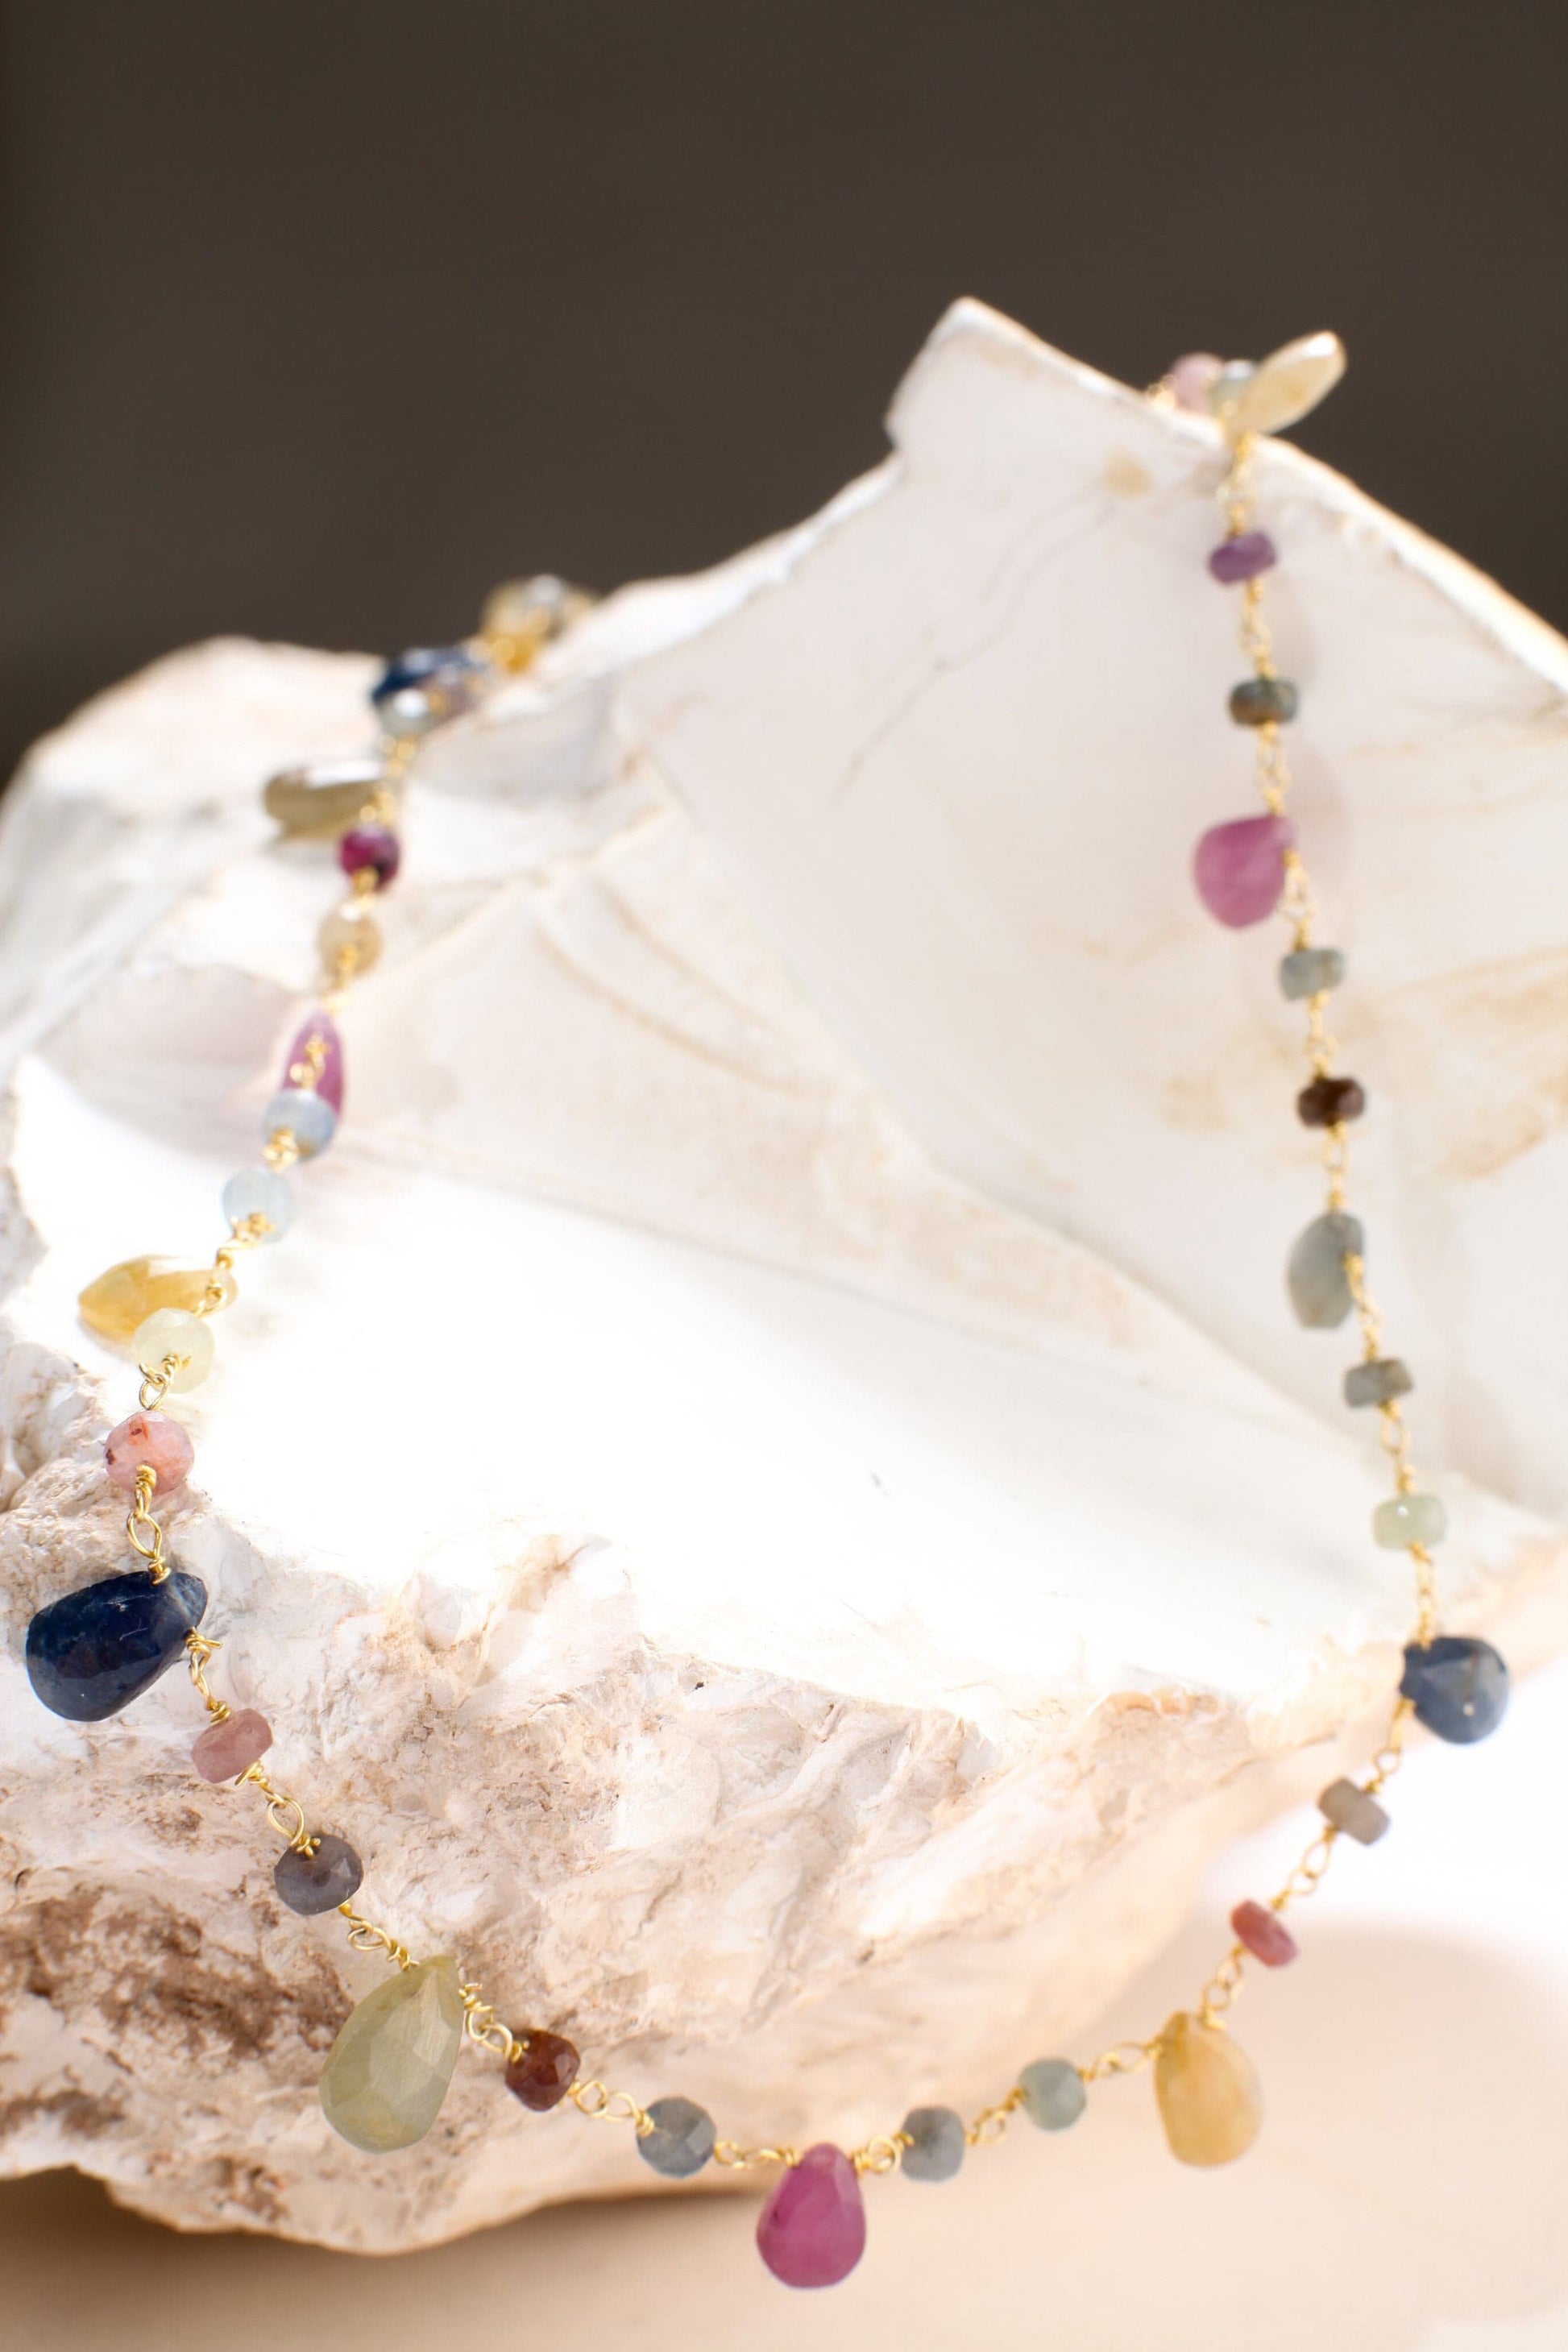 Multi Sapphire Necklace Wire Wrapped Dangling Faceted Pear Drop 5x7-6x9mm with Sapphire Rondelle in 14K Gold Filled Chain & Clasp Necklace